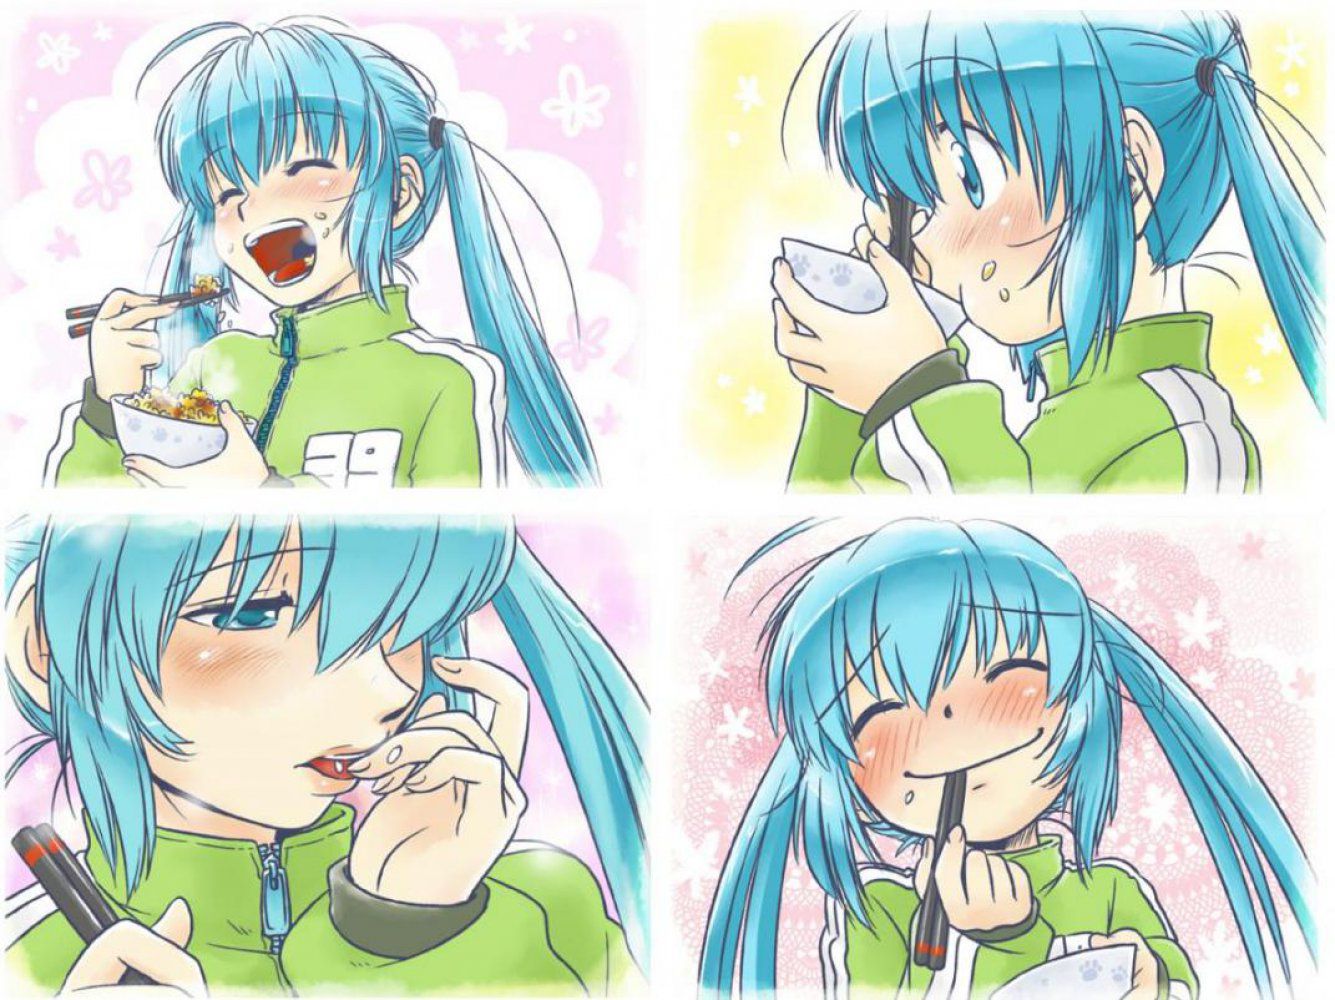 Secondary: Images of girls eating and drinking 34